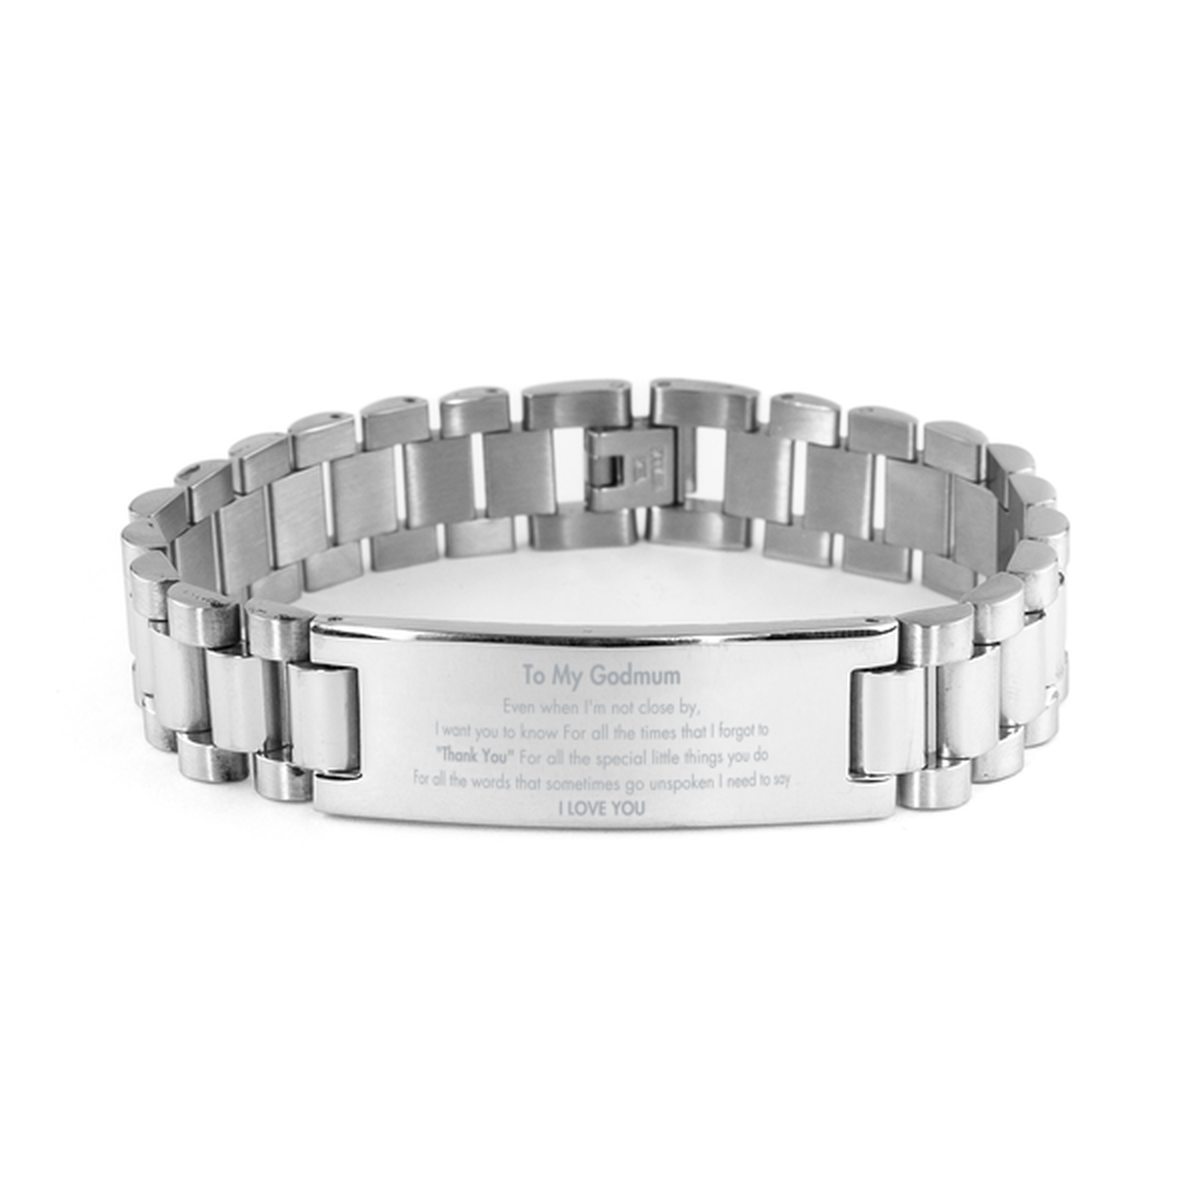 Thank You Gifts for Godmum, Keepsake Ladder Stainless Steel Bracelet Gifts for Godmum Birthday Mother's day Father's Day Godmum For all the words That sometimes go unspoken I need to say I LOVE YOU